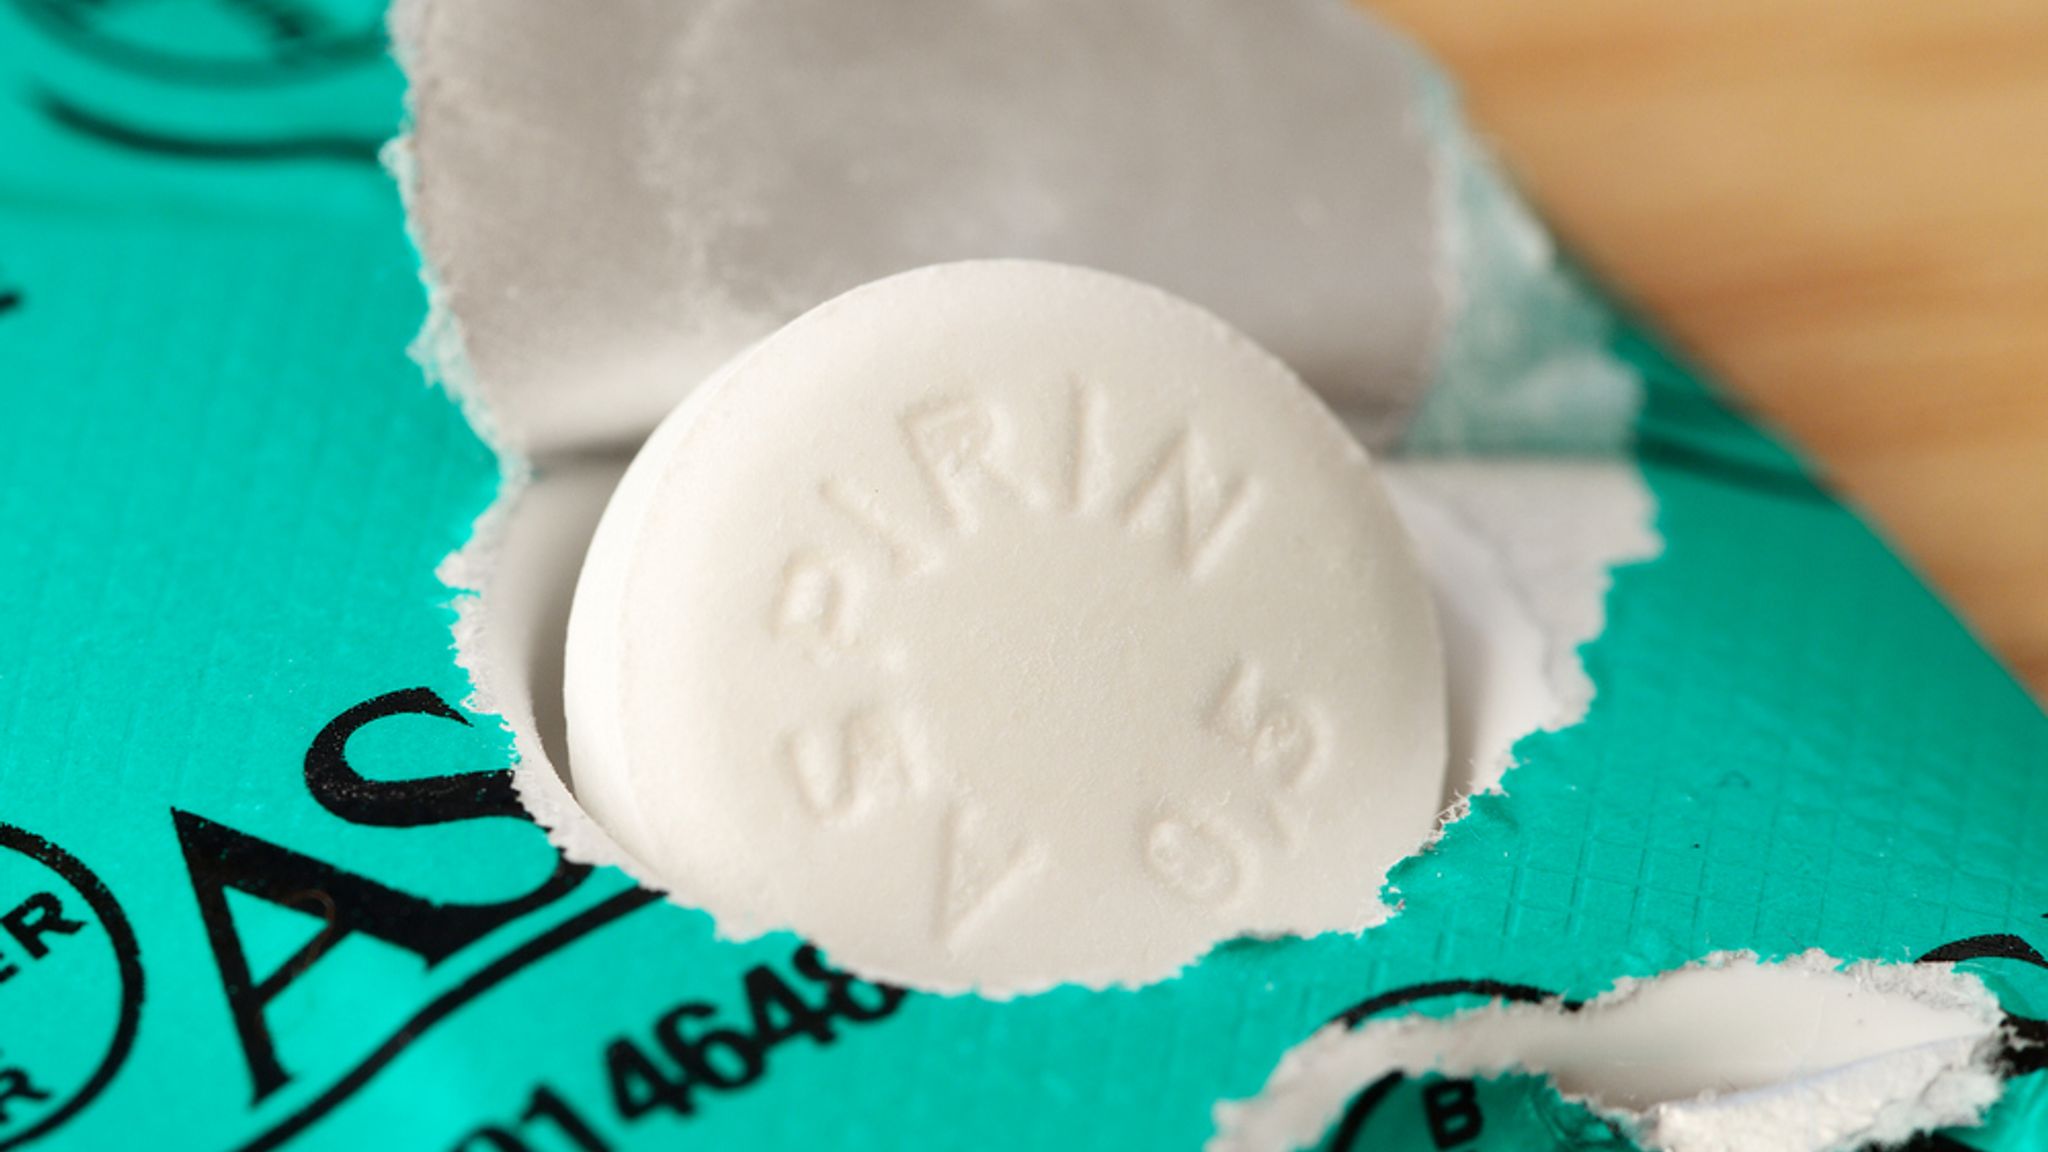 Aspirin could help cut diabetes risk in over-65s, study suggests ...